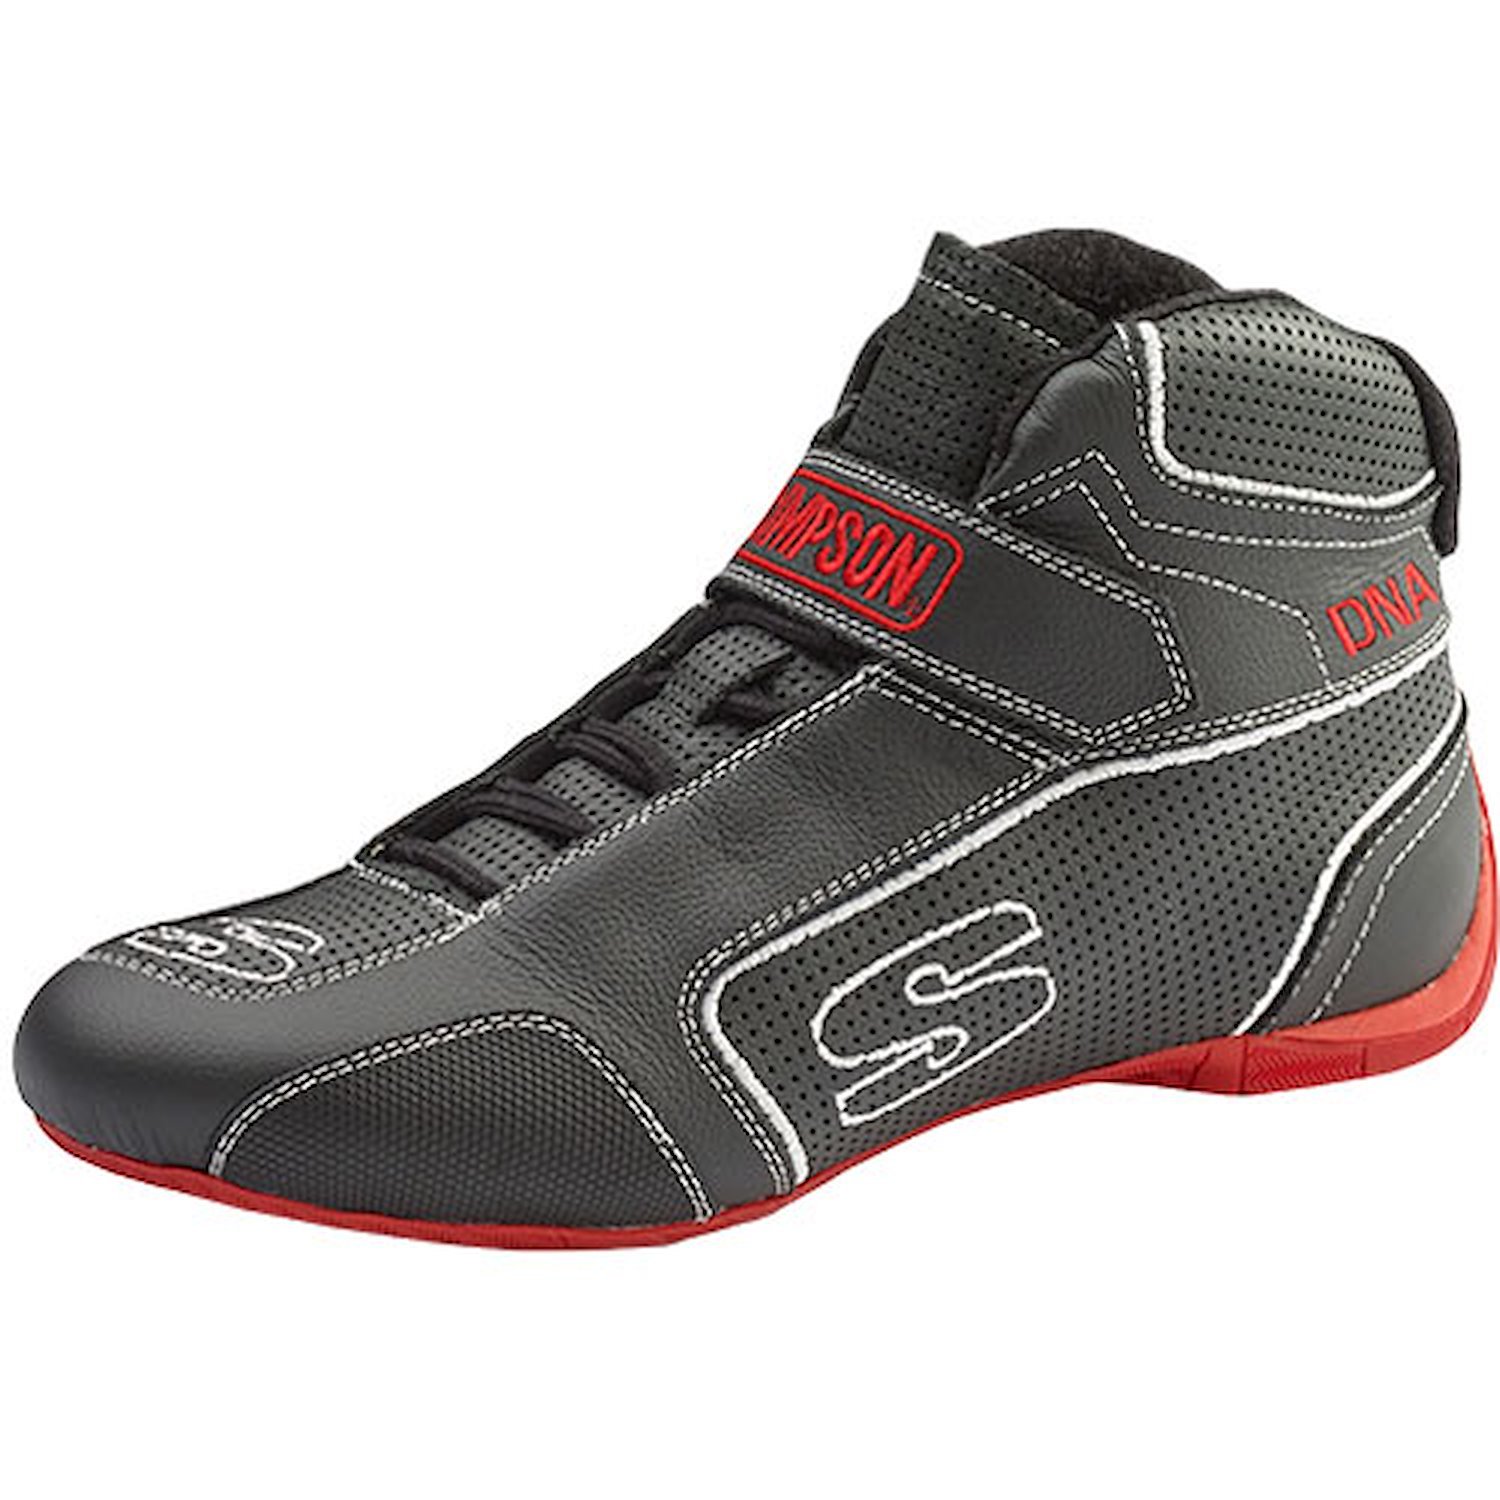 SFI 3.3/5 DNA Racing Shoes Size: 8.5